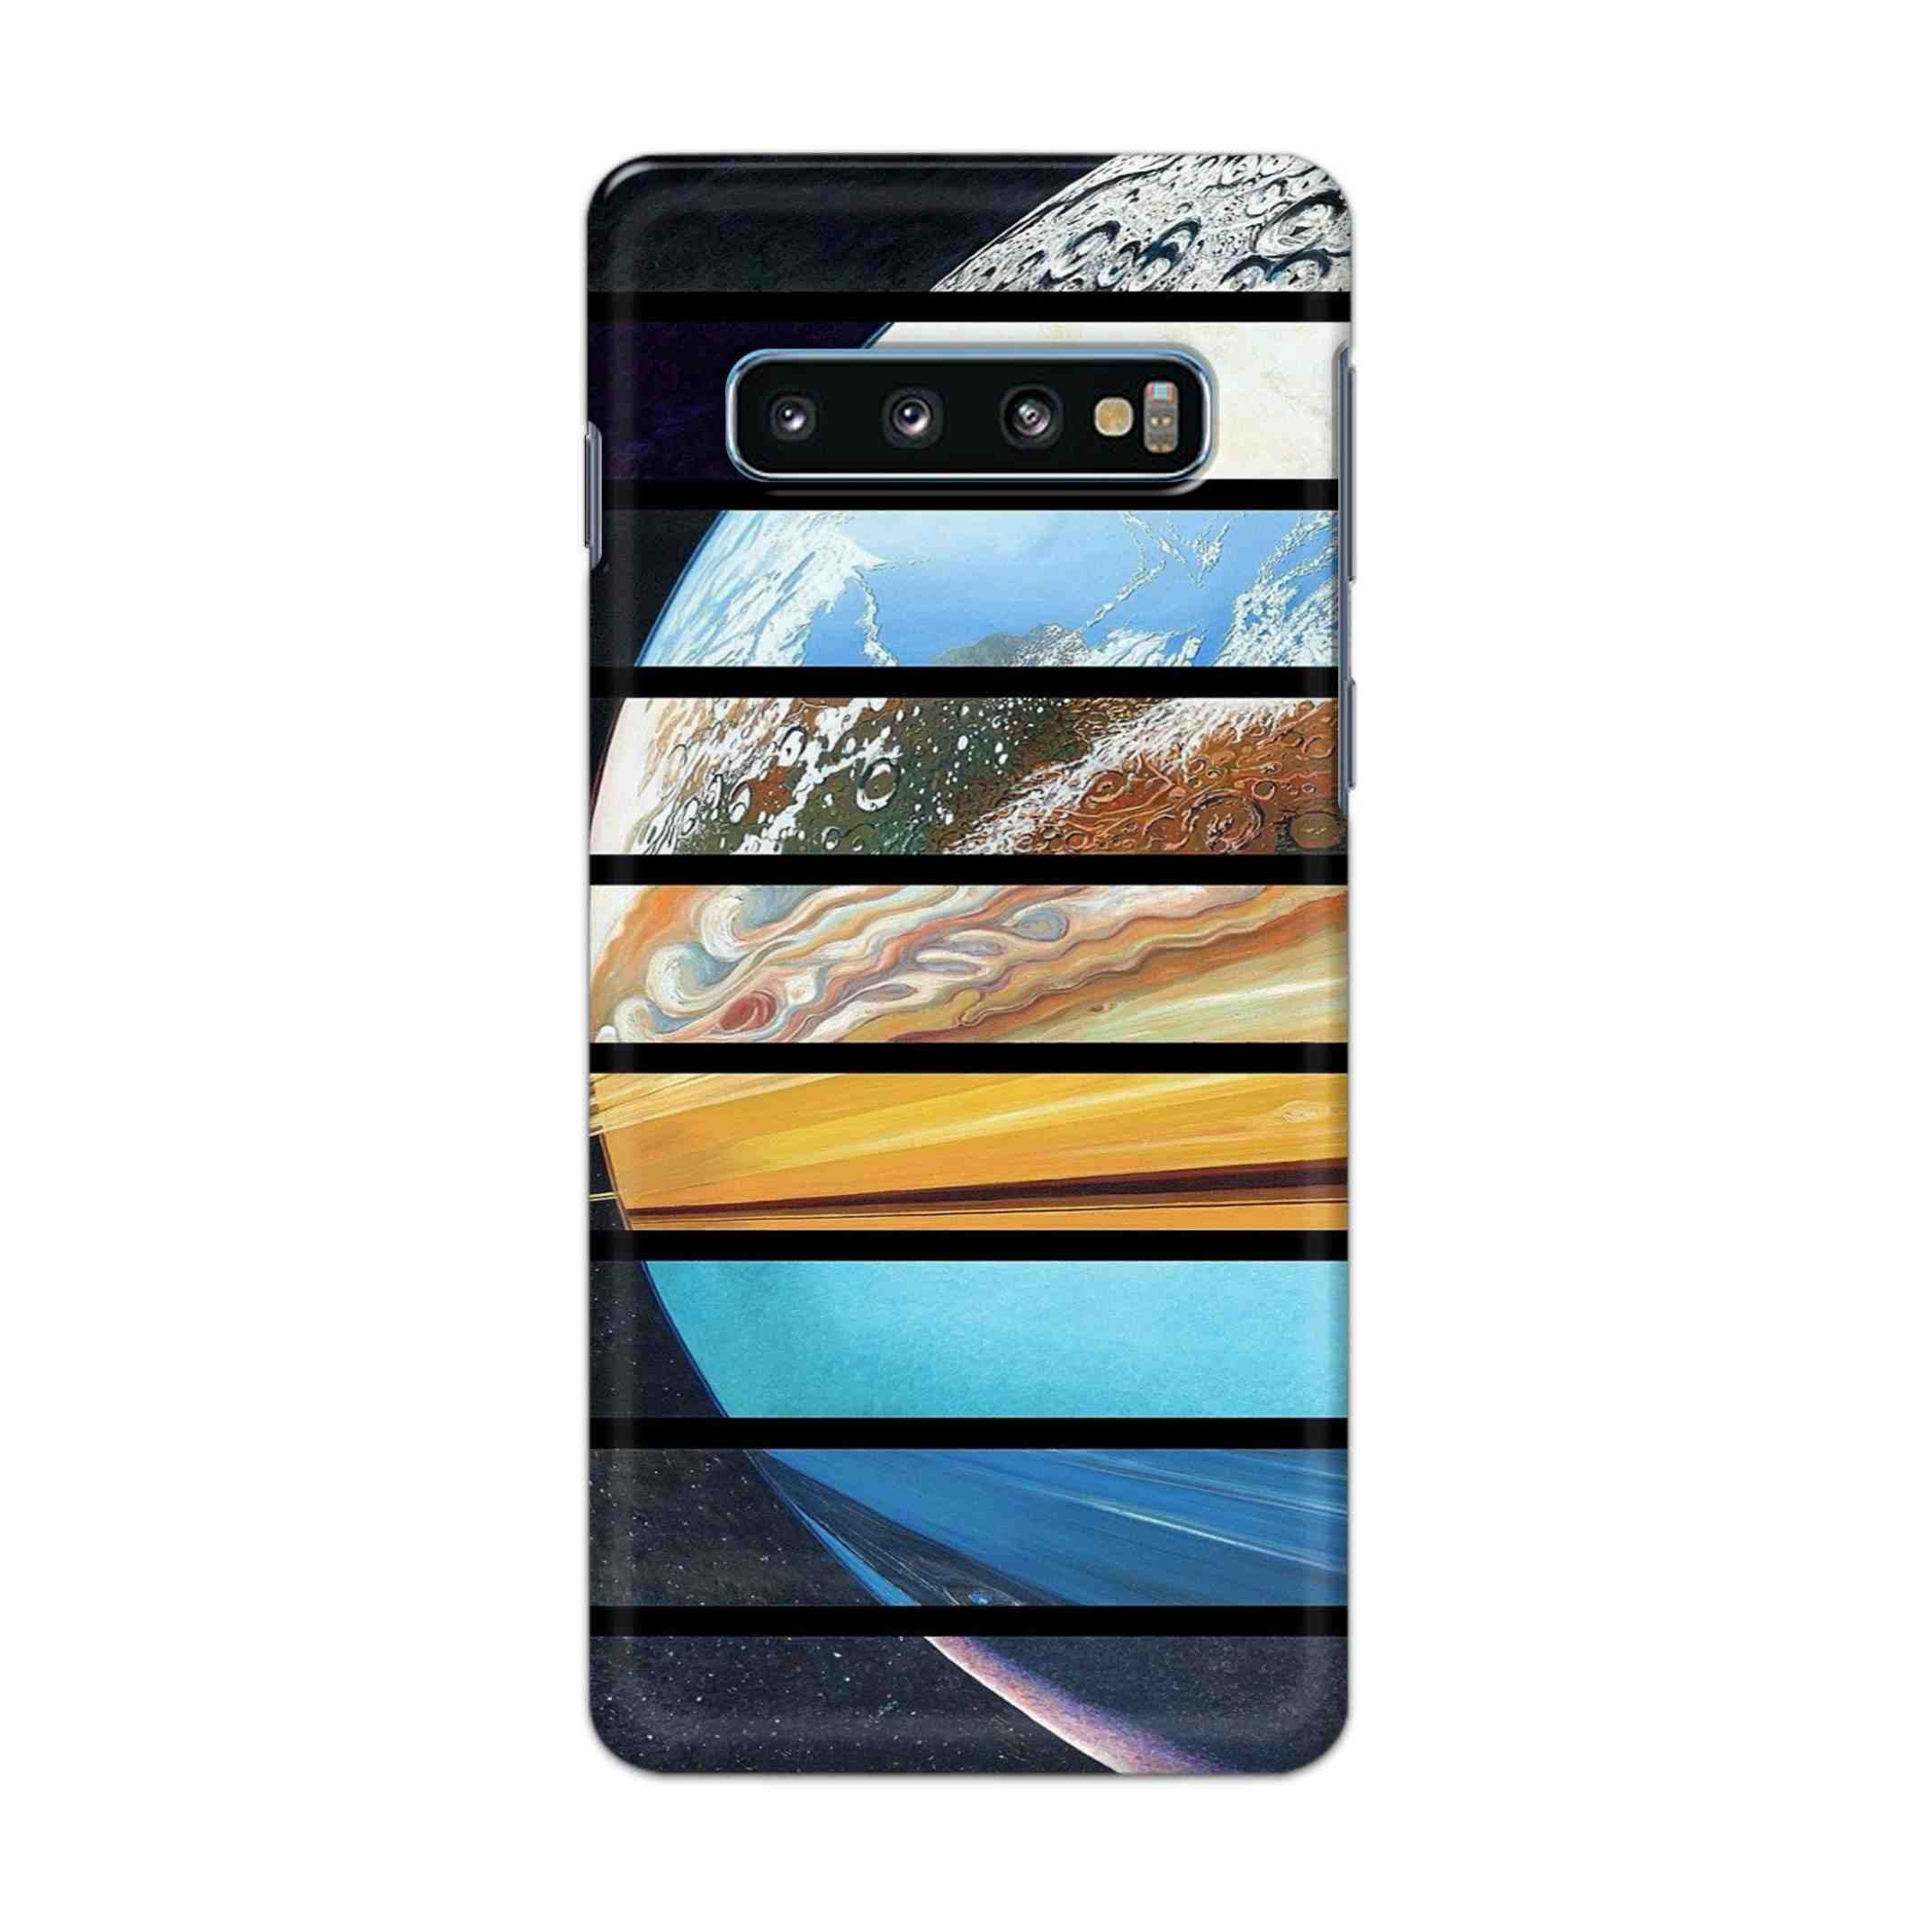 Buy Colourful Earth Hard Back Mobile Phone Case Cover For Samsung Galaxy S10 Plus Online